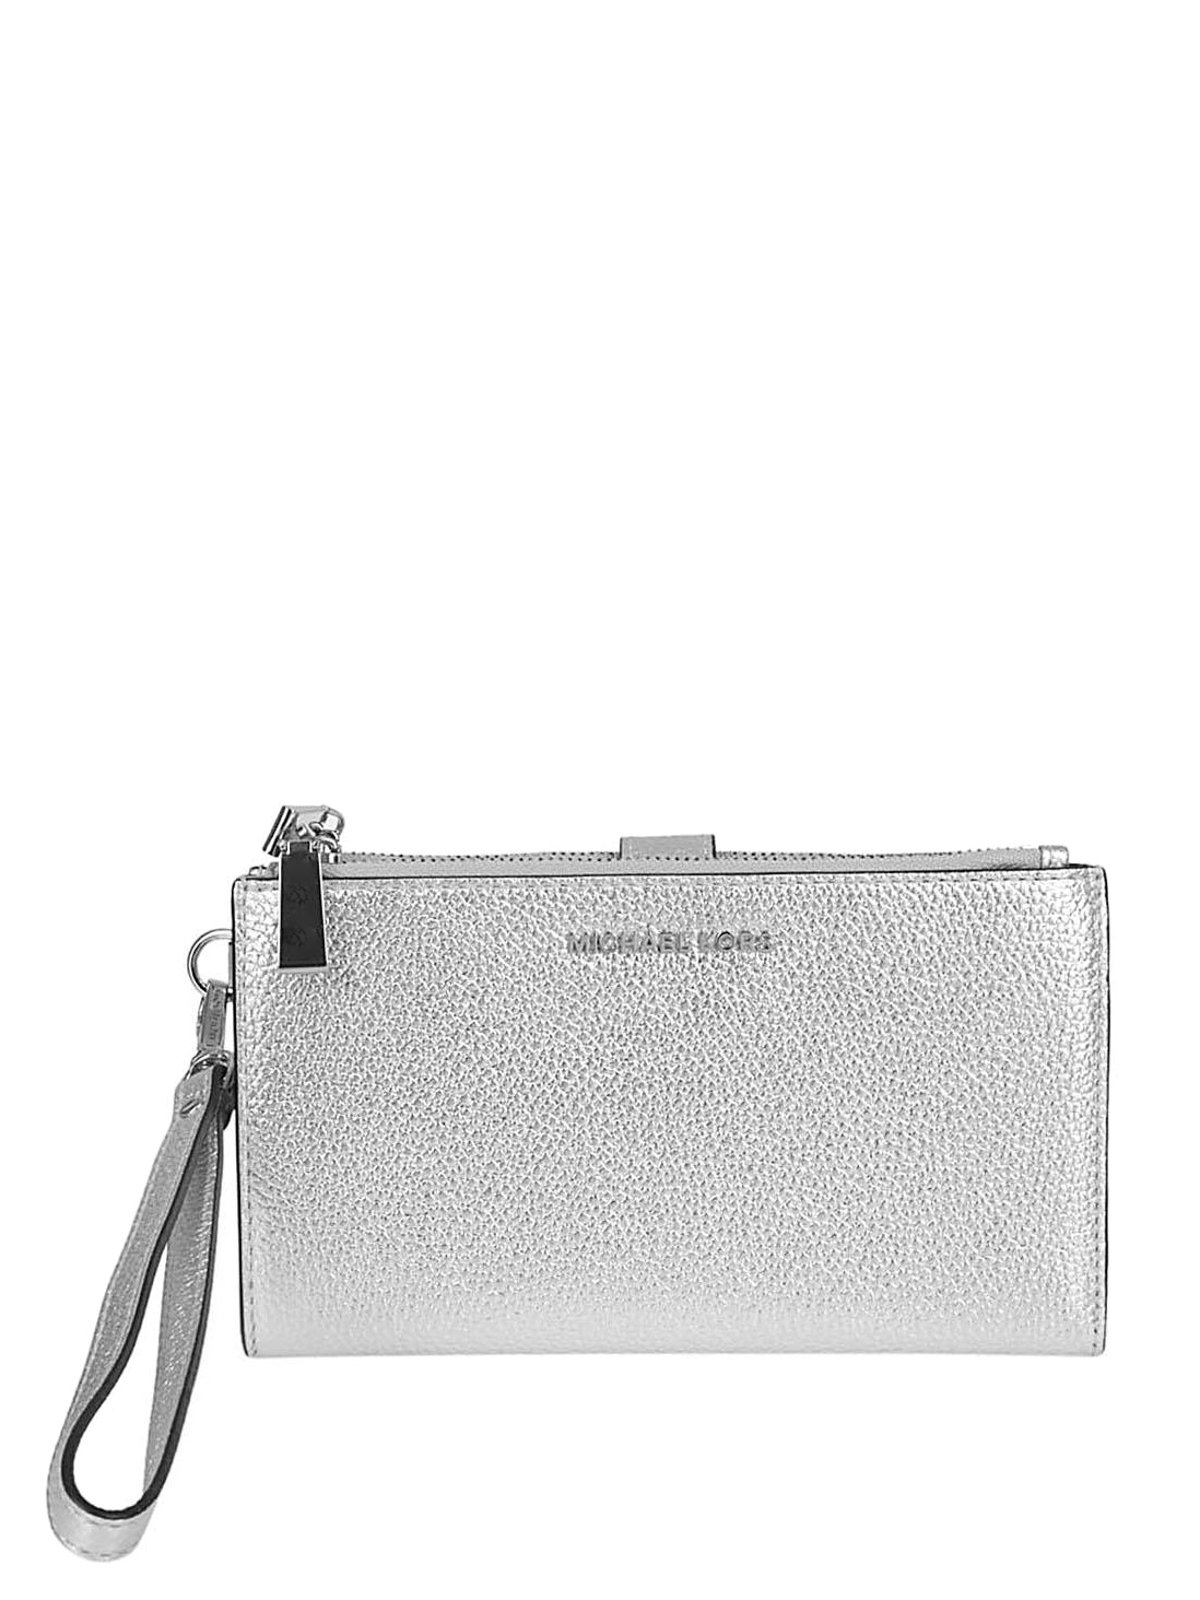 Wallets & purses Michael Kors - Silver laminated leather wallet -  32F7MFDW4M040